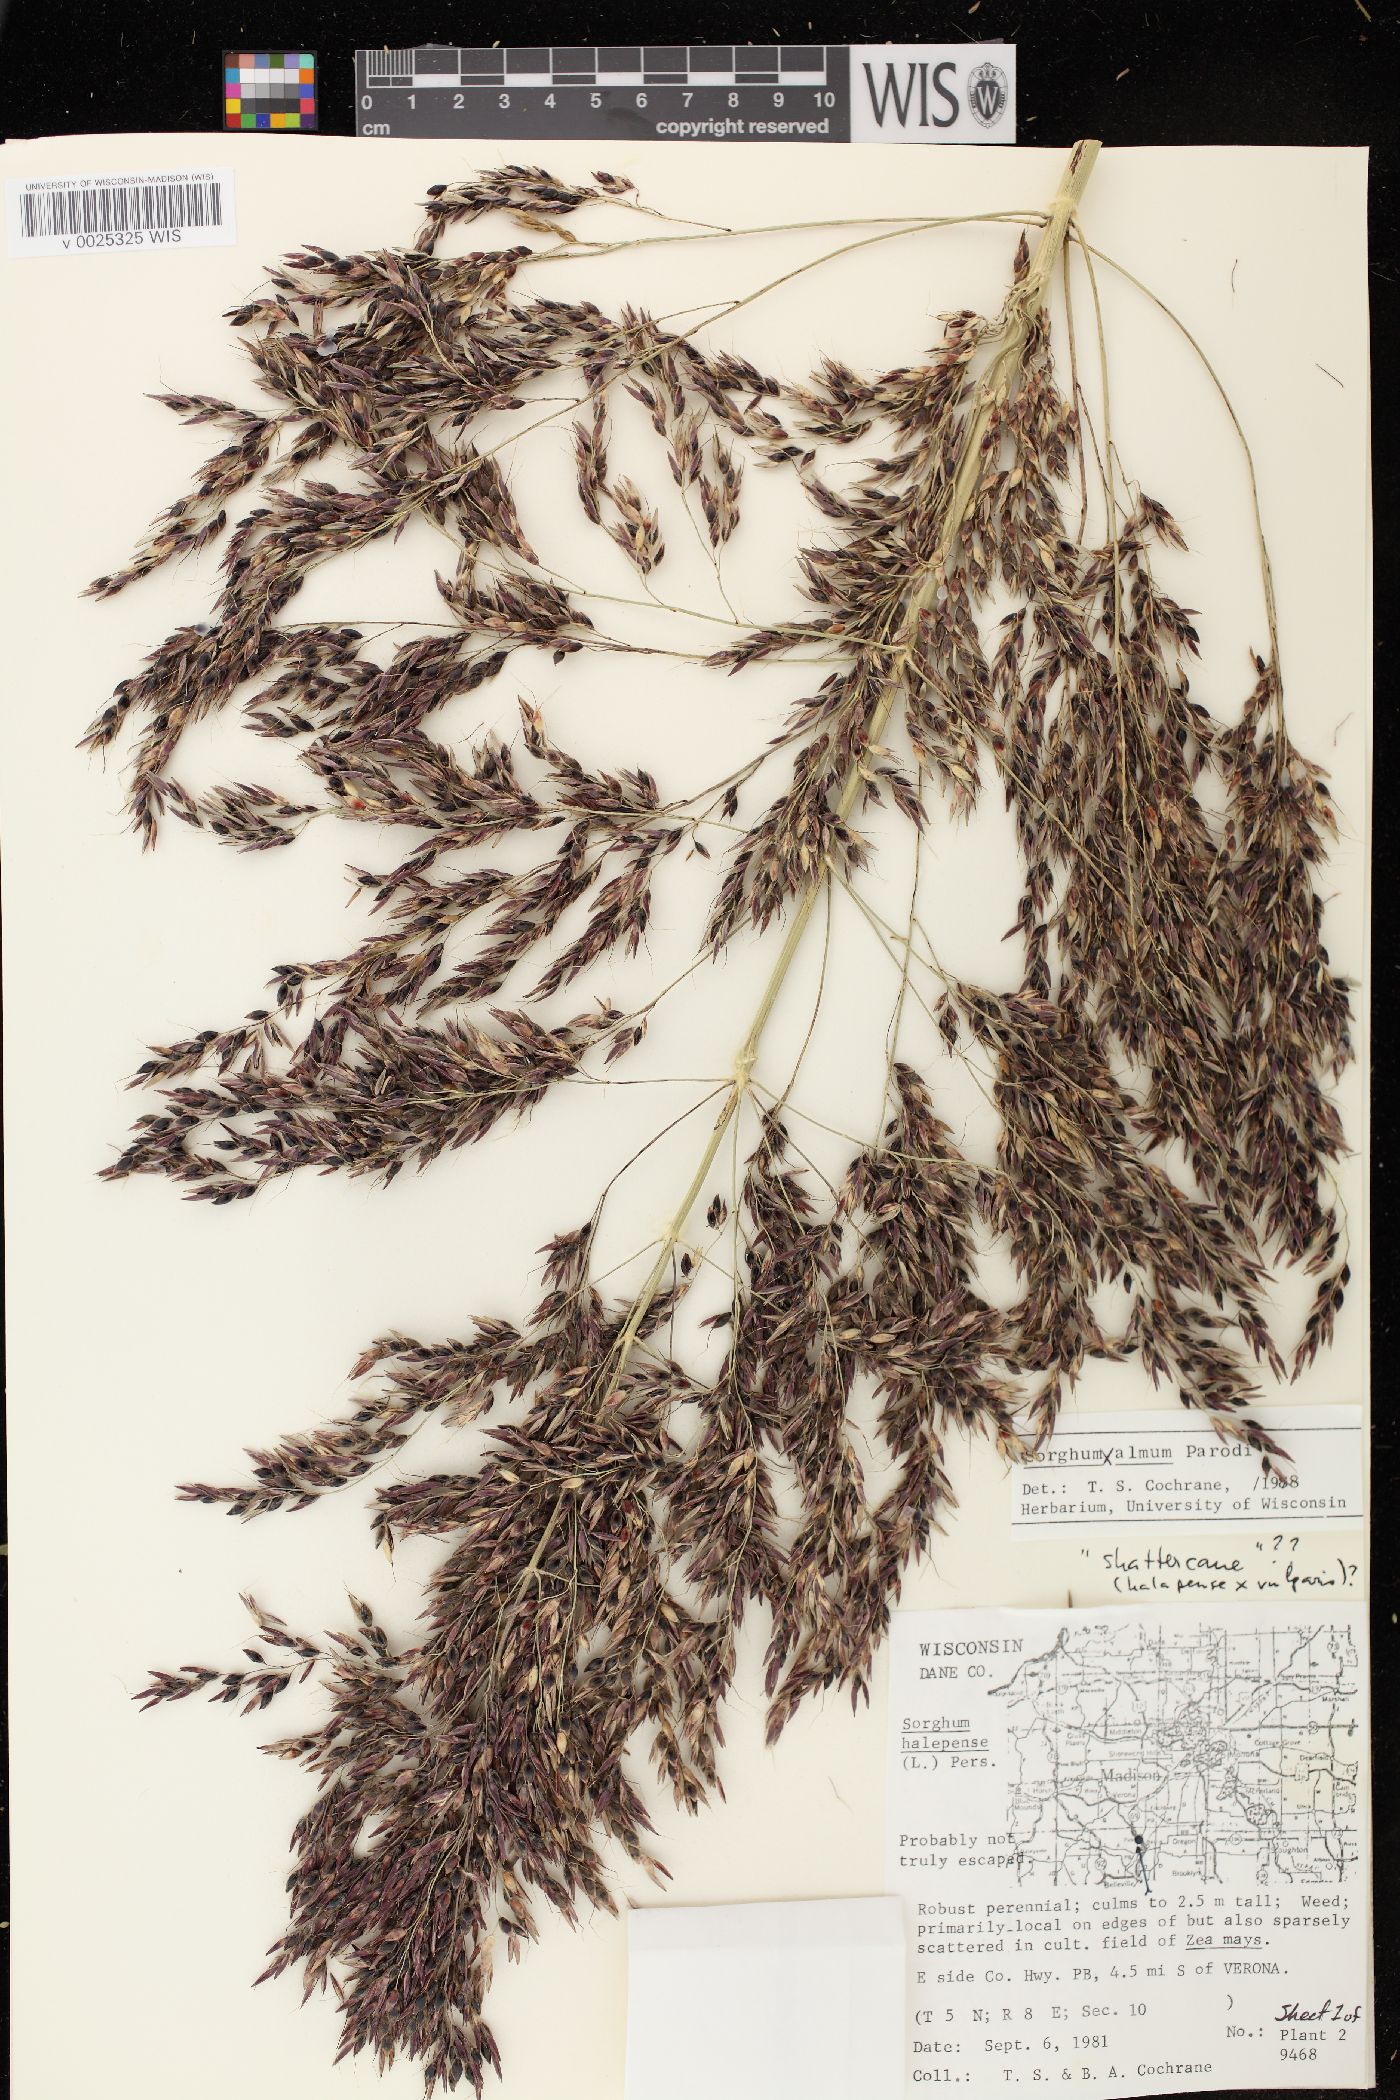 Herbarium specimen of a grass stalk with many large floppy seed heads, pressed.